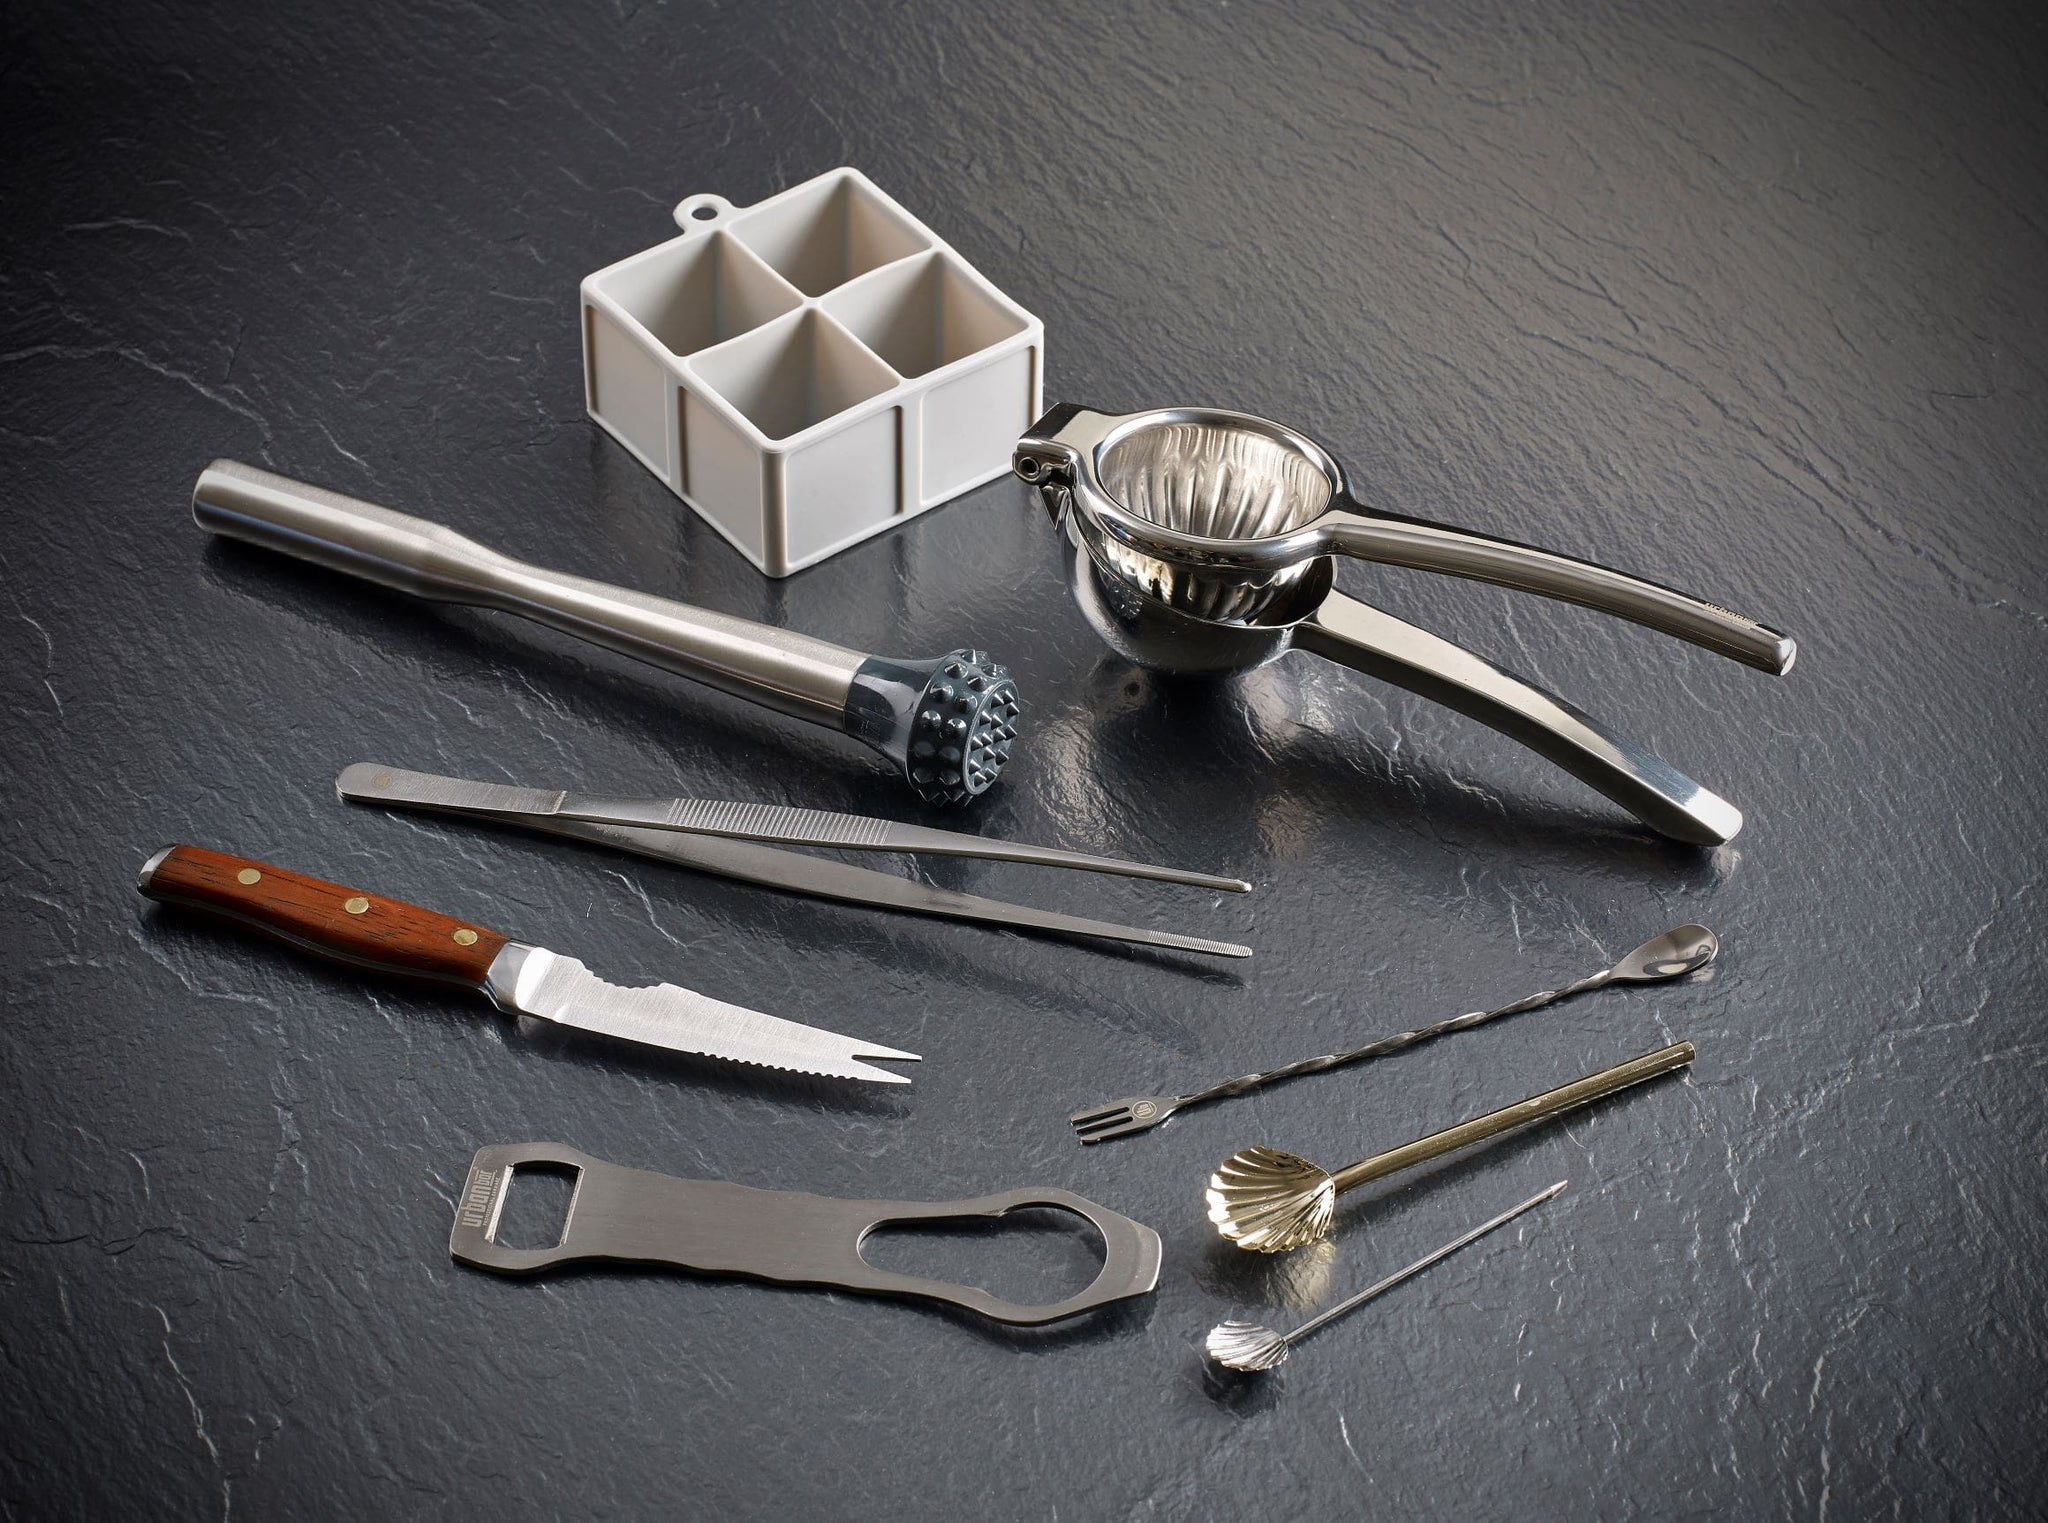 Cocktail Accessories: Tools, Sticks and Stirrers